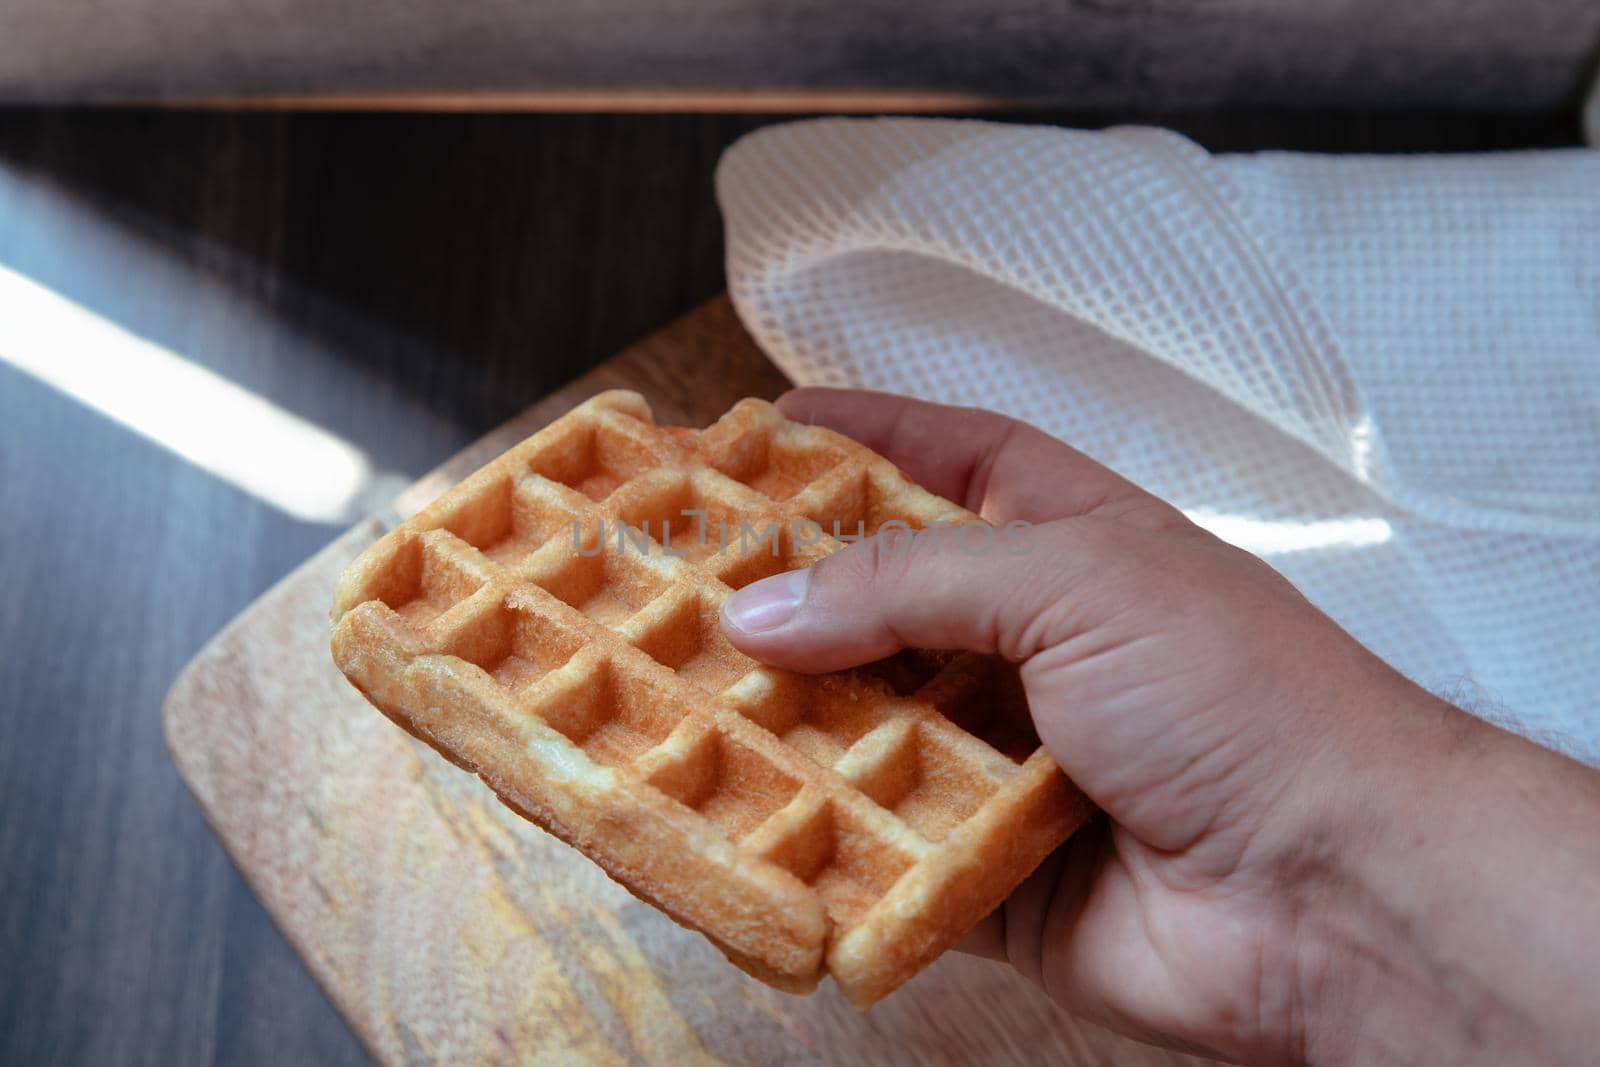 hand taking a waffle from the plate